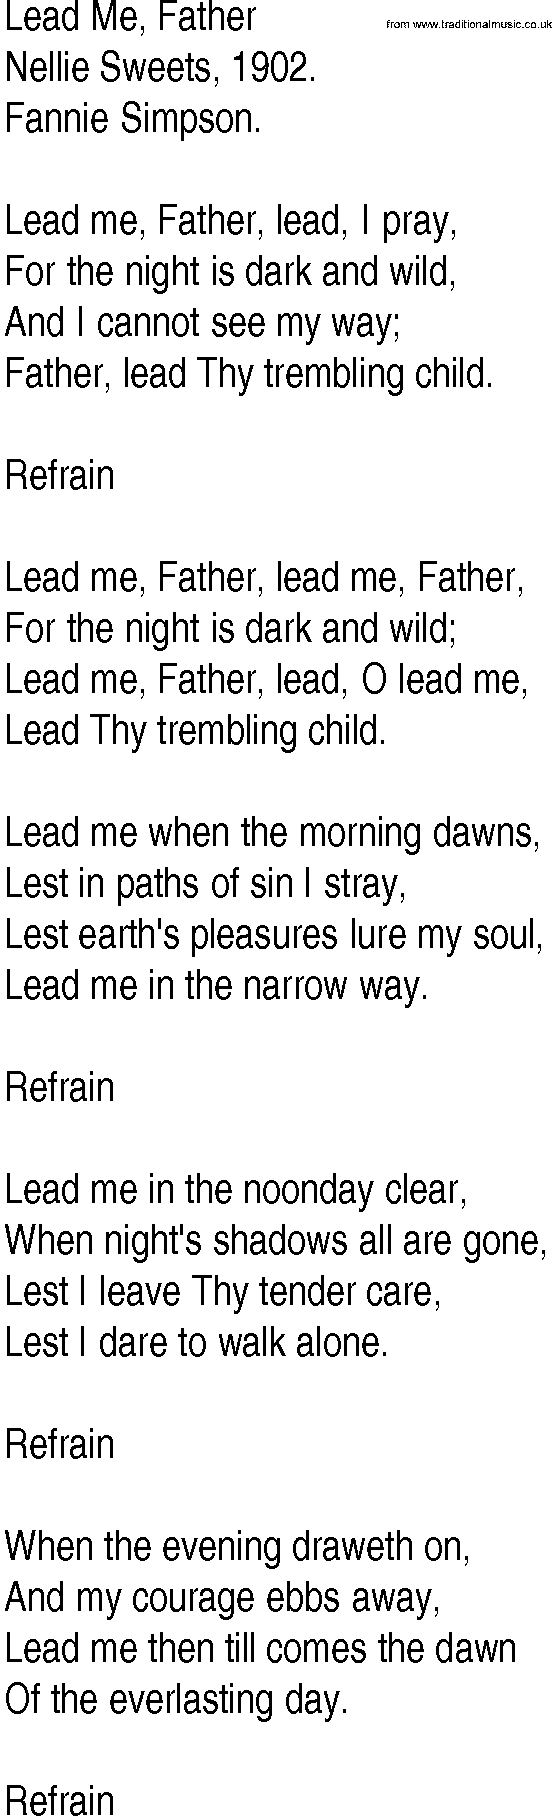 Hymn and Gospel Song: Lead Me, Father by Nellie Sweets lyrics